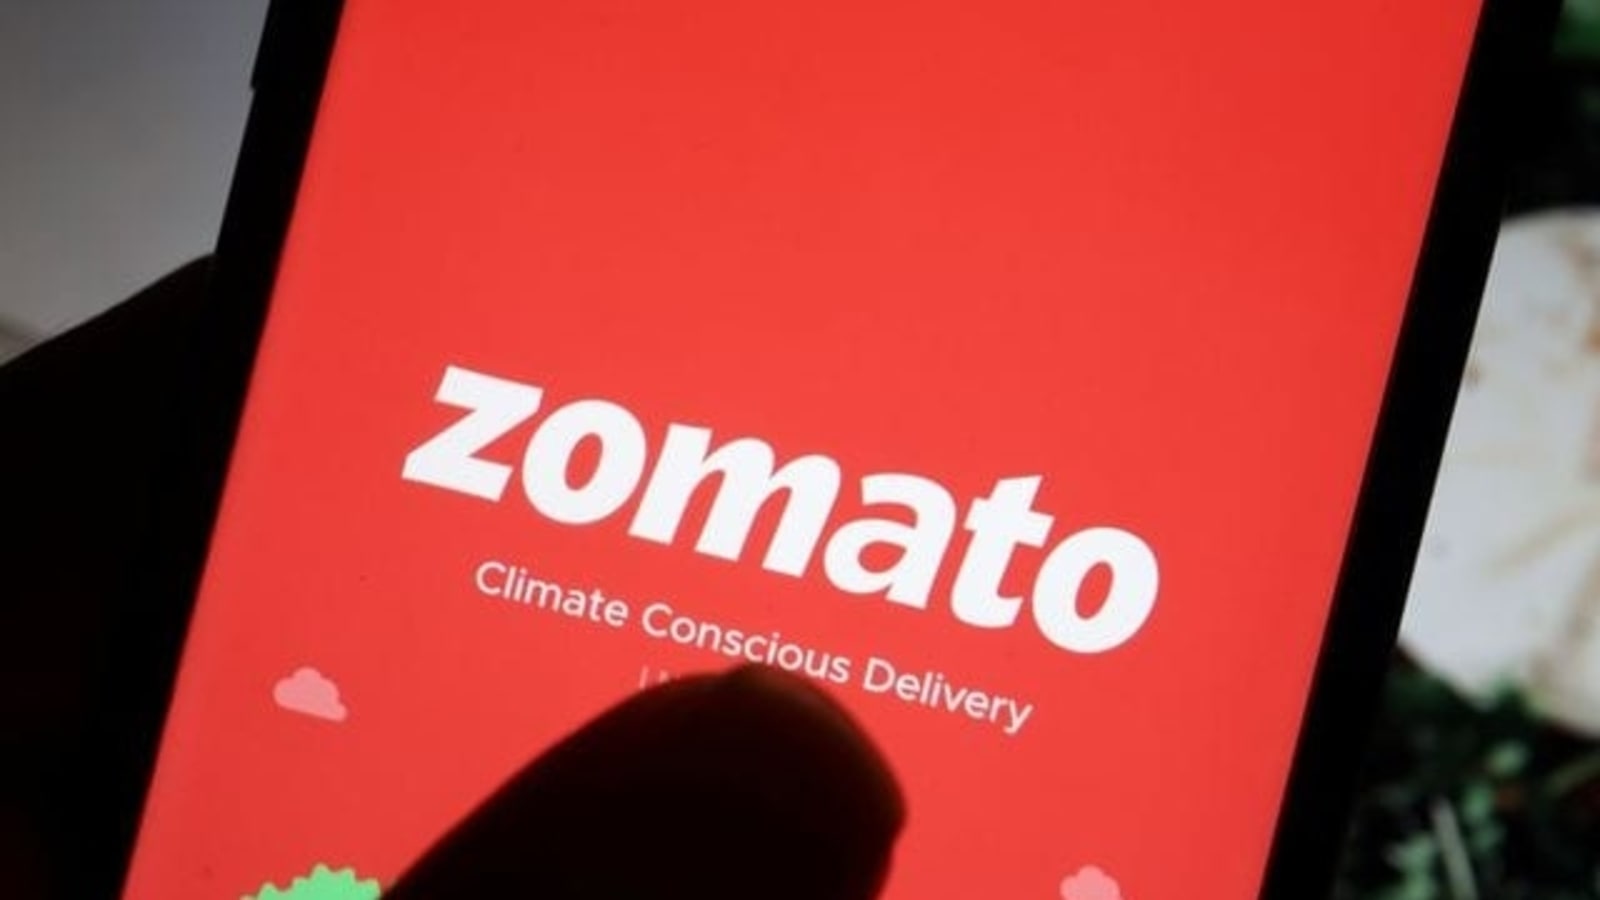 Zomato plans new management structure, with multiple CEOs: Report